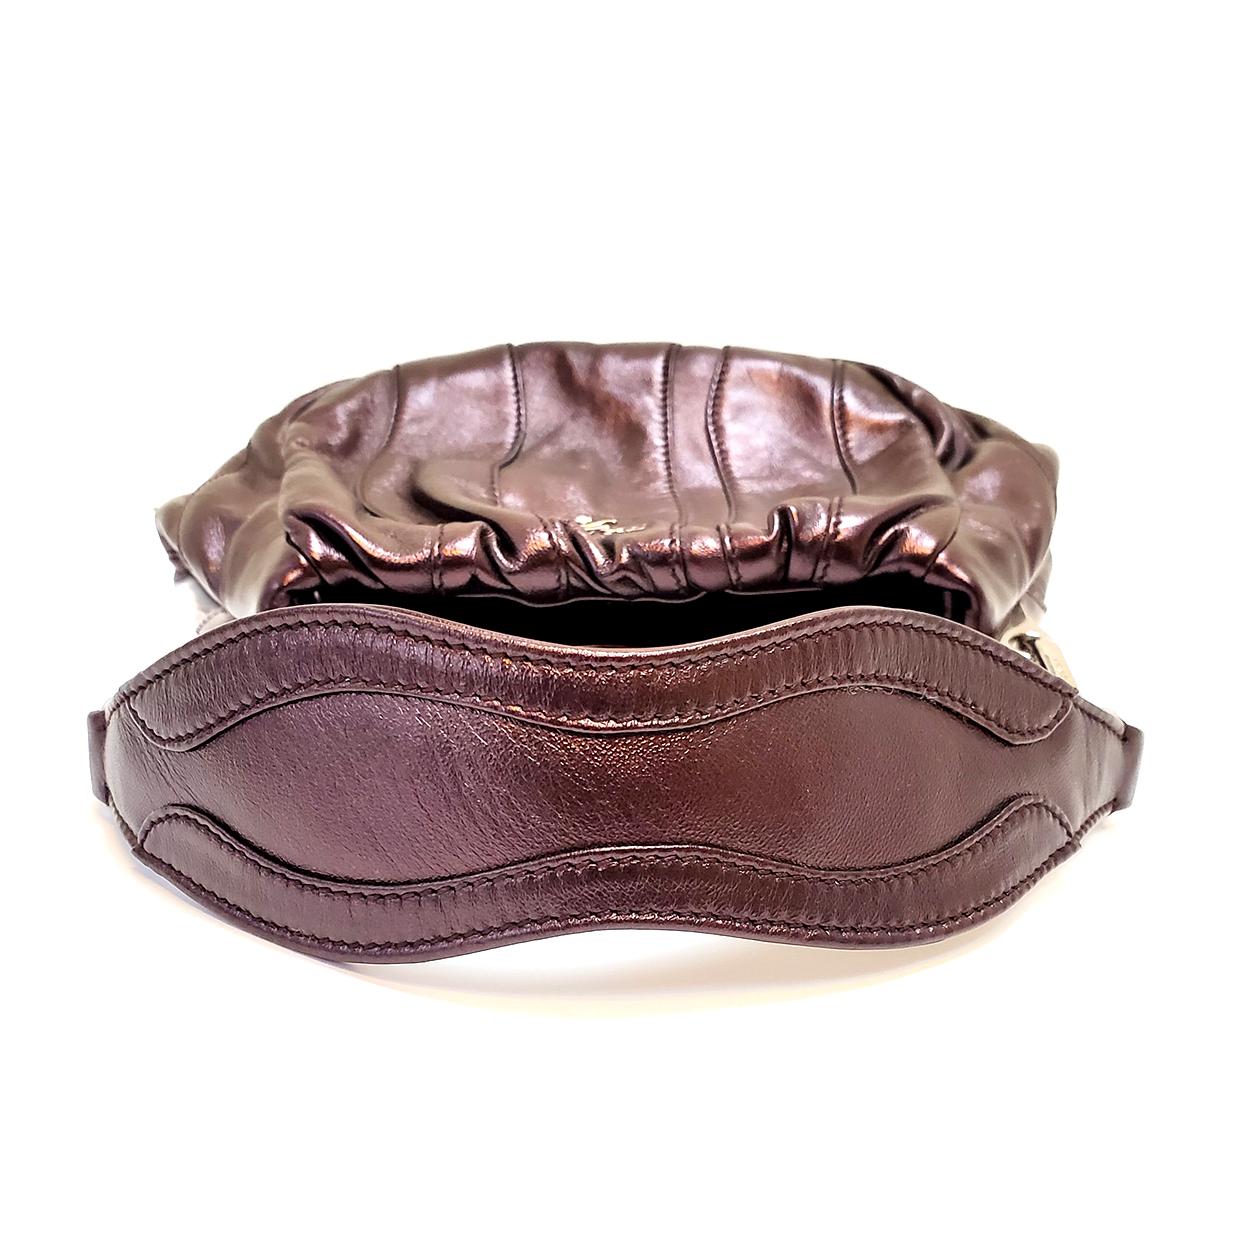 Prada Nappa Waves Metallic Wine Hobo Bag In Excellent Condition For Sale In Columbia, MO